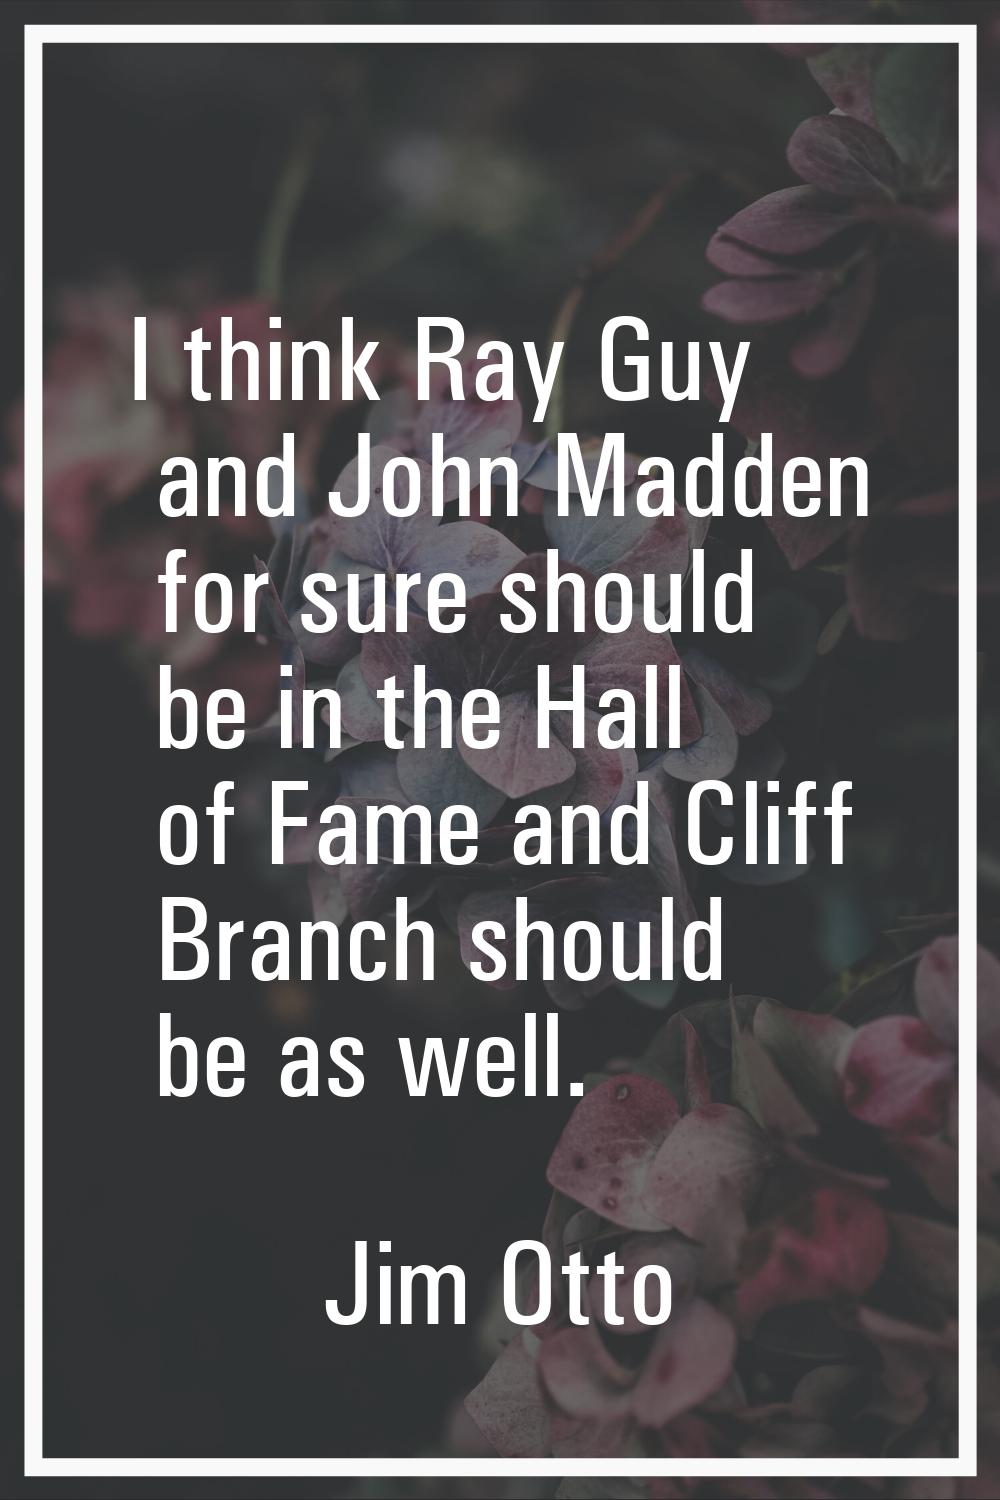 I think Ray Guy and John Madden for sure should be in the Hall of Fame and Cliff Branch should be a